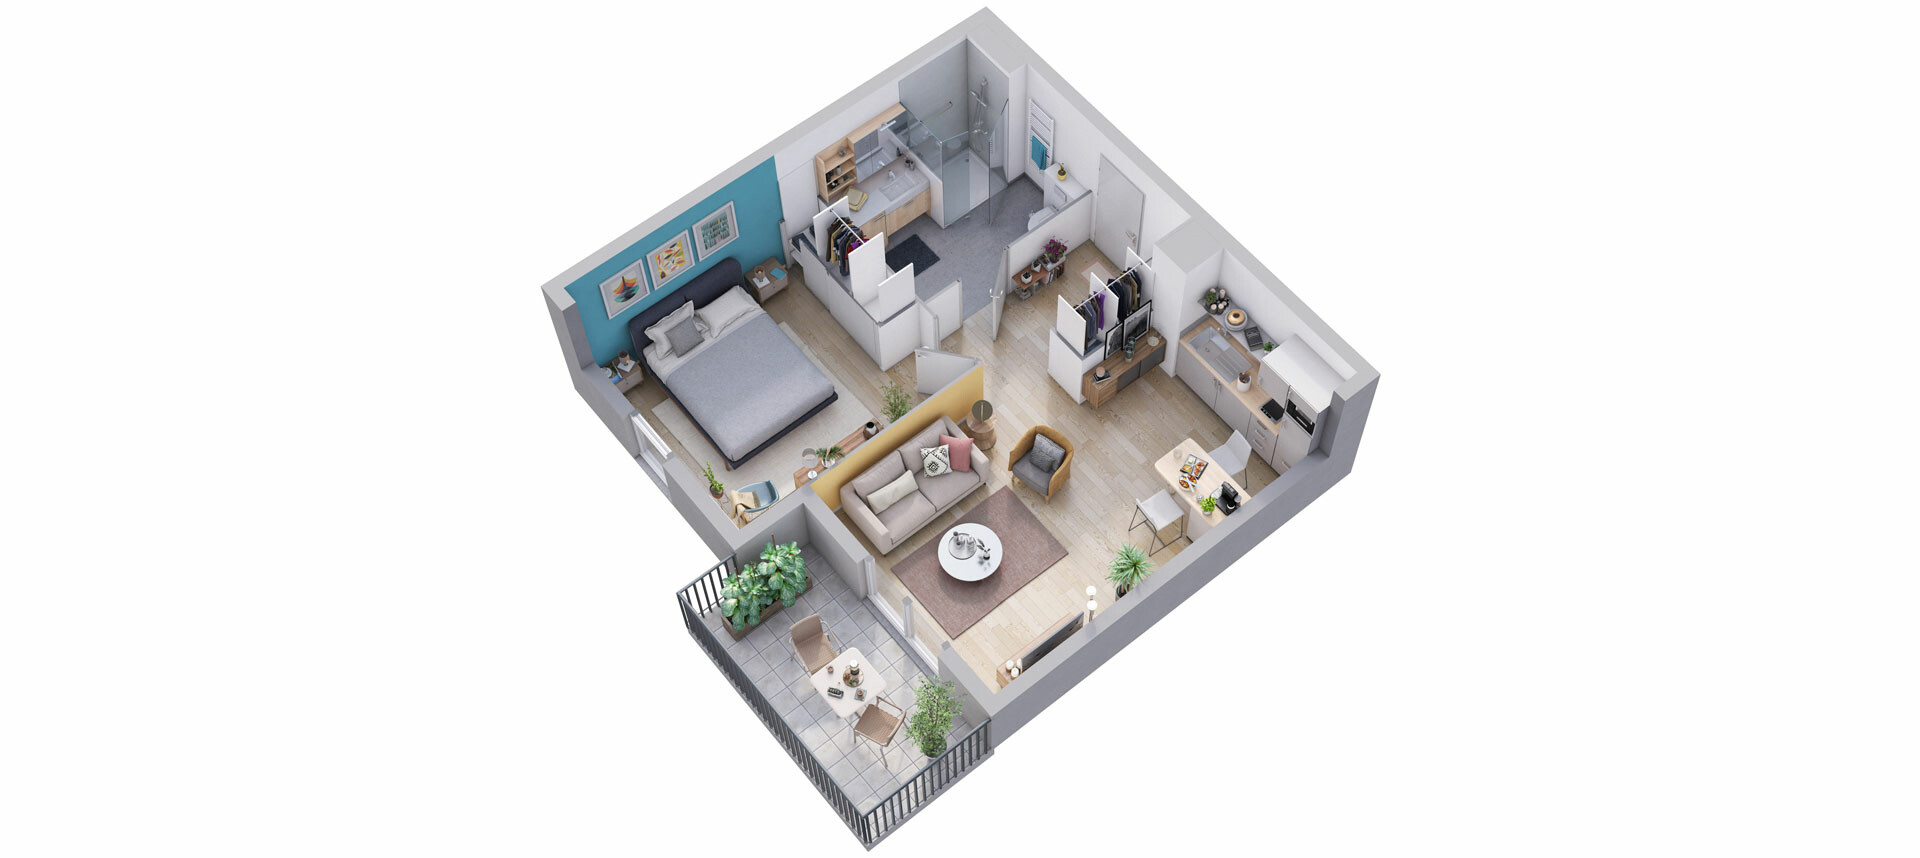 plan-coupe-appartement-type-domitys-trois-pieces.jpg